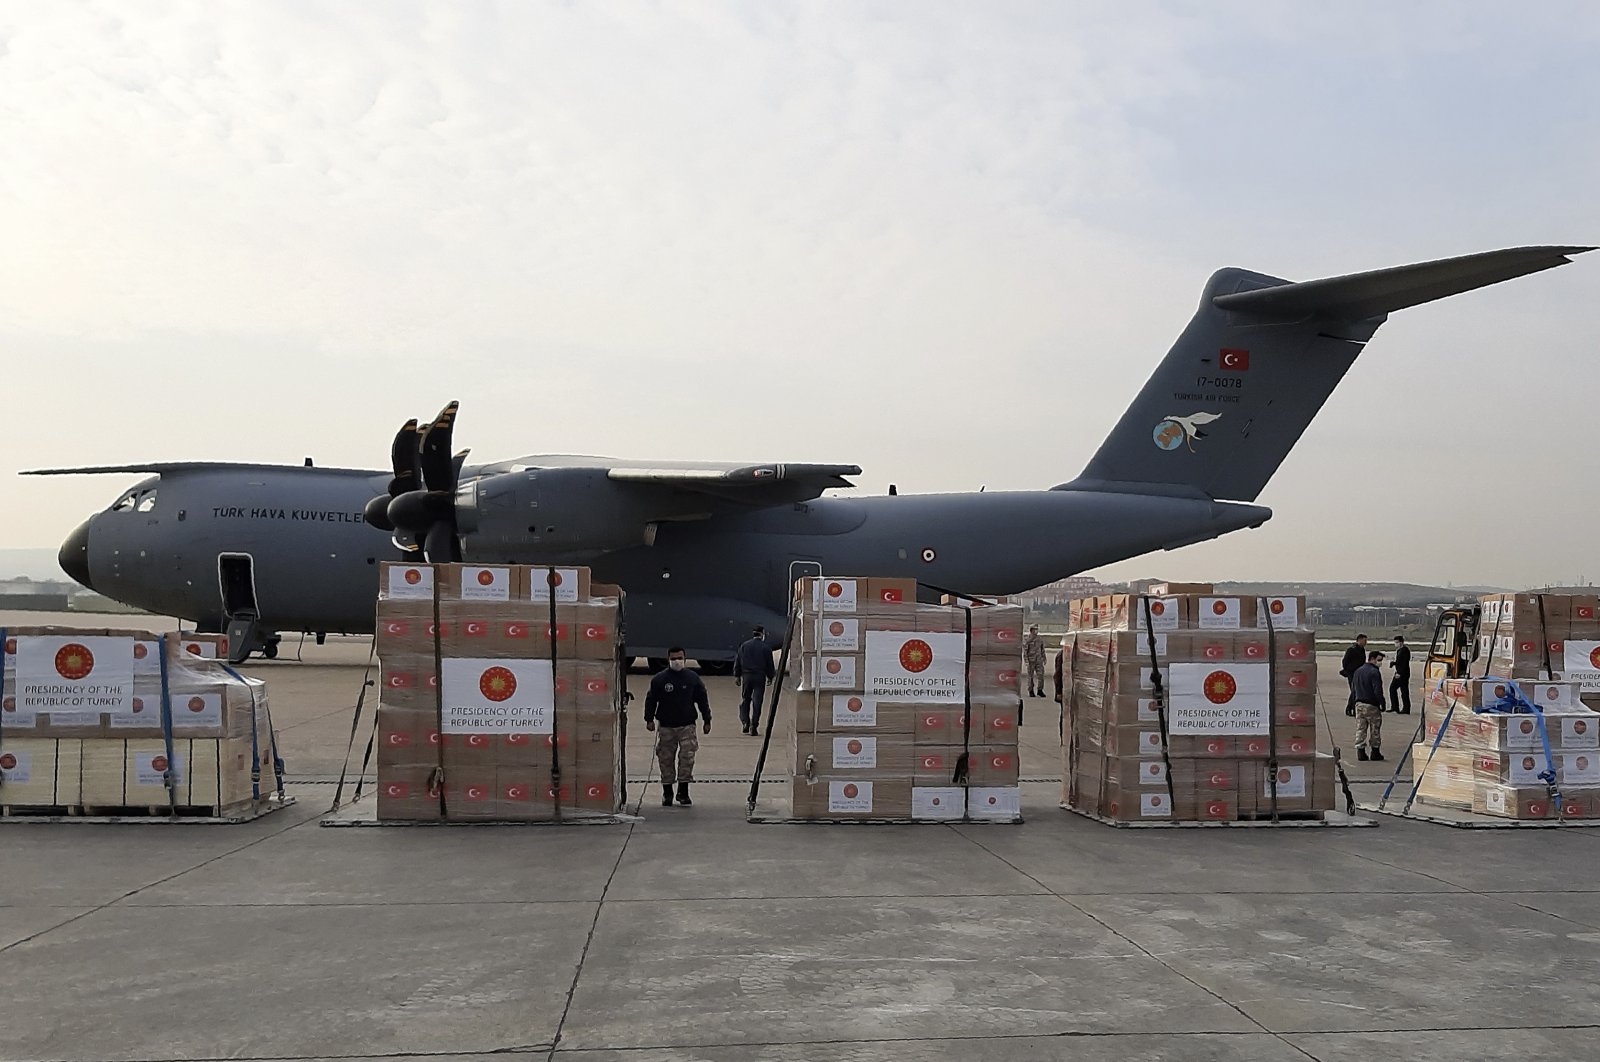 Soldiers prepare to load a military cargo plane with personal protection equipment heading to Italy and Spain to help the countries combat the coronavirus outbreak, Ankara, Wednesday, April 1, 2020. (AP Photo)